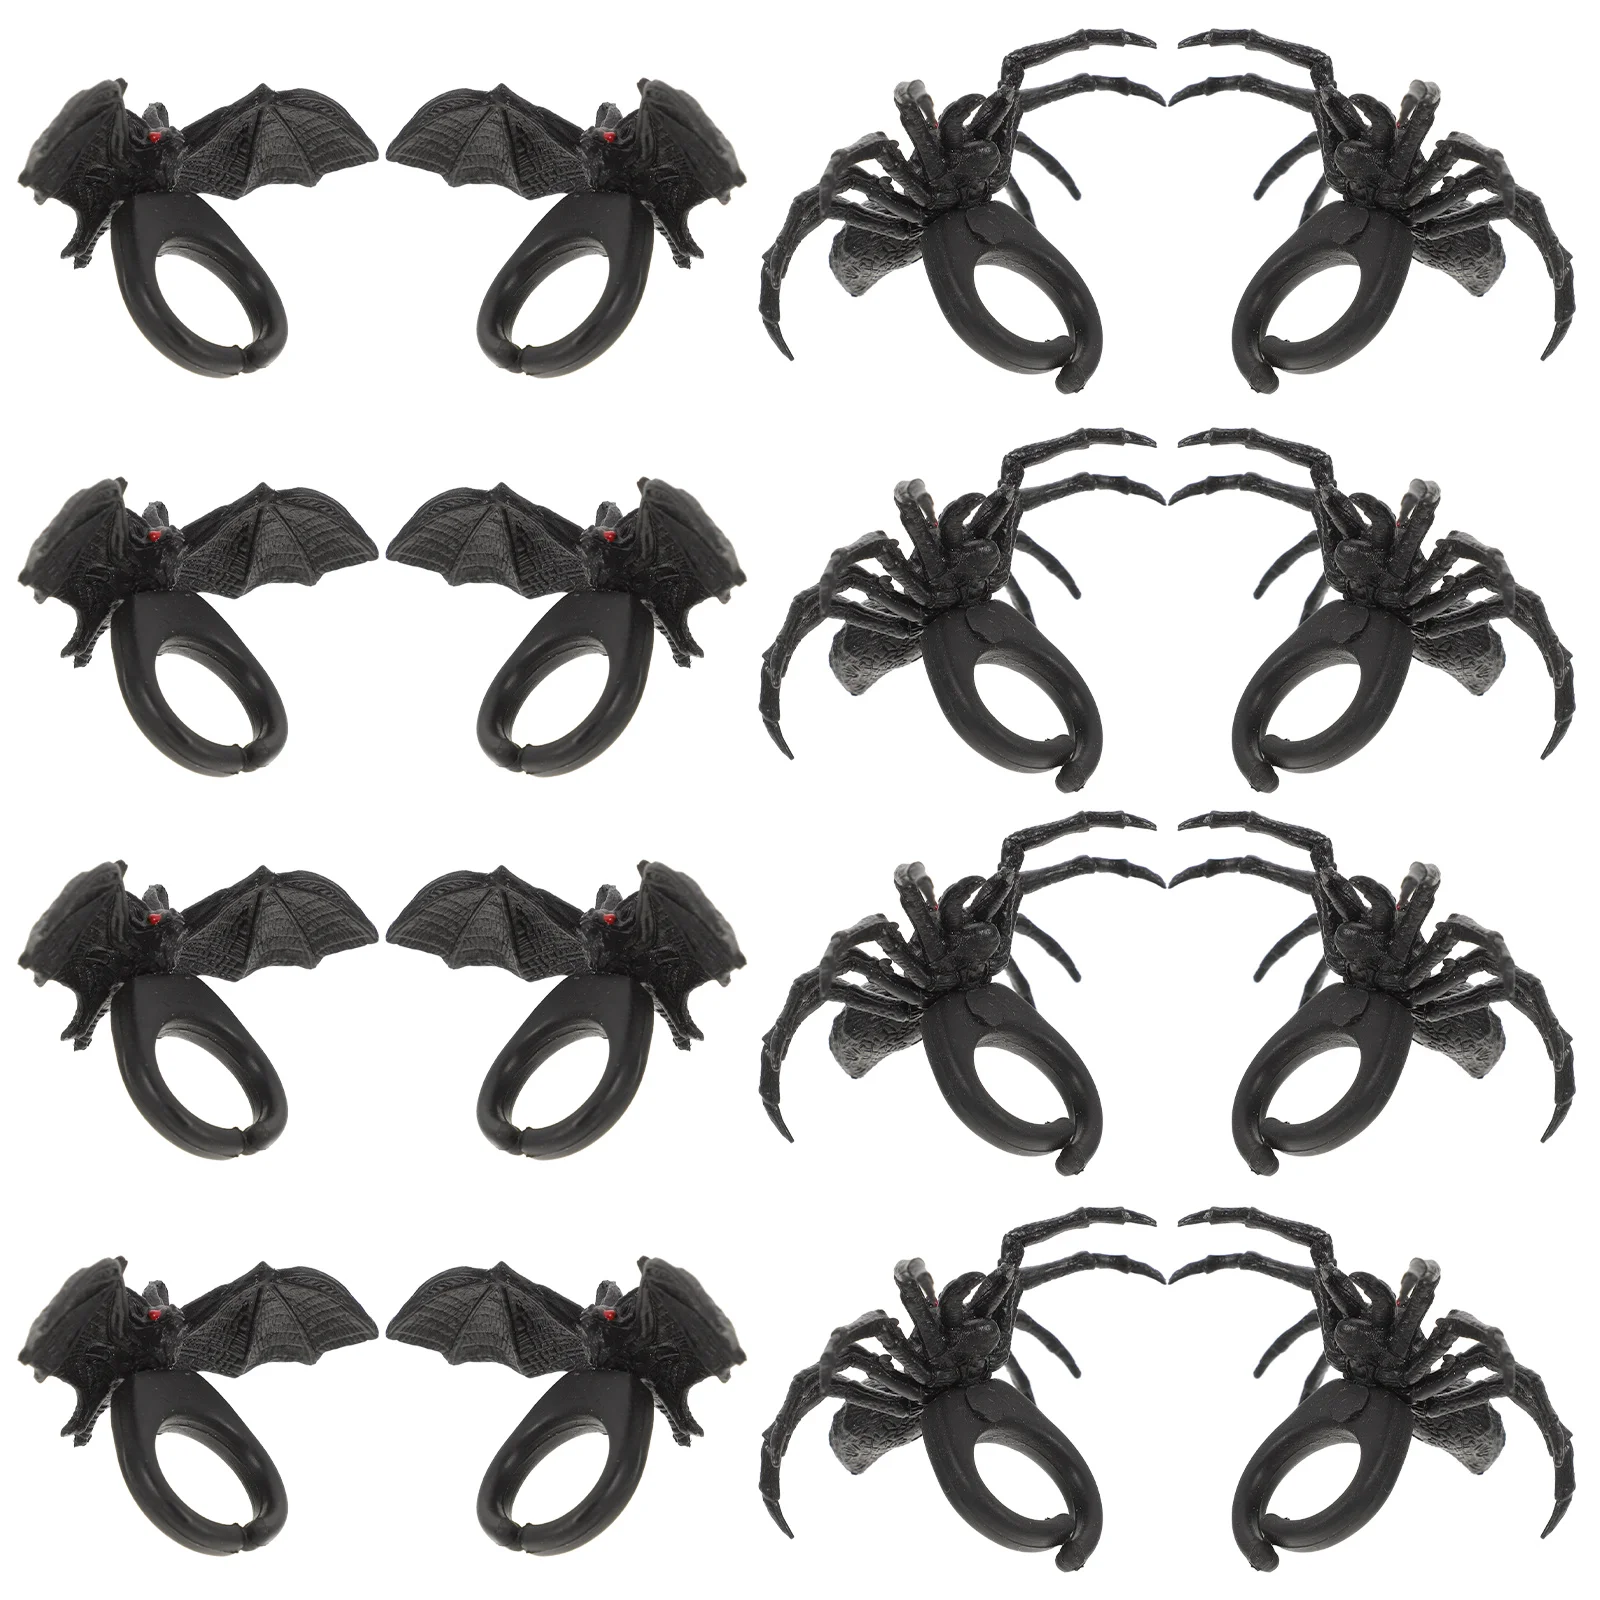 

24 Pcs Cake Decorations Spider Bat Ring Treating Toy Rings Pinky Haunted House Plastic Trick Miss